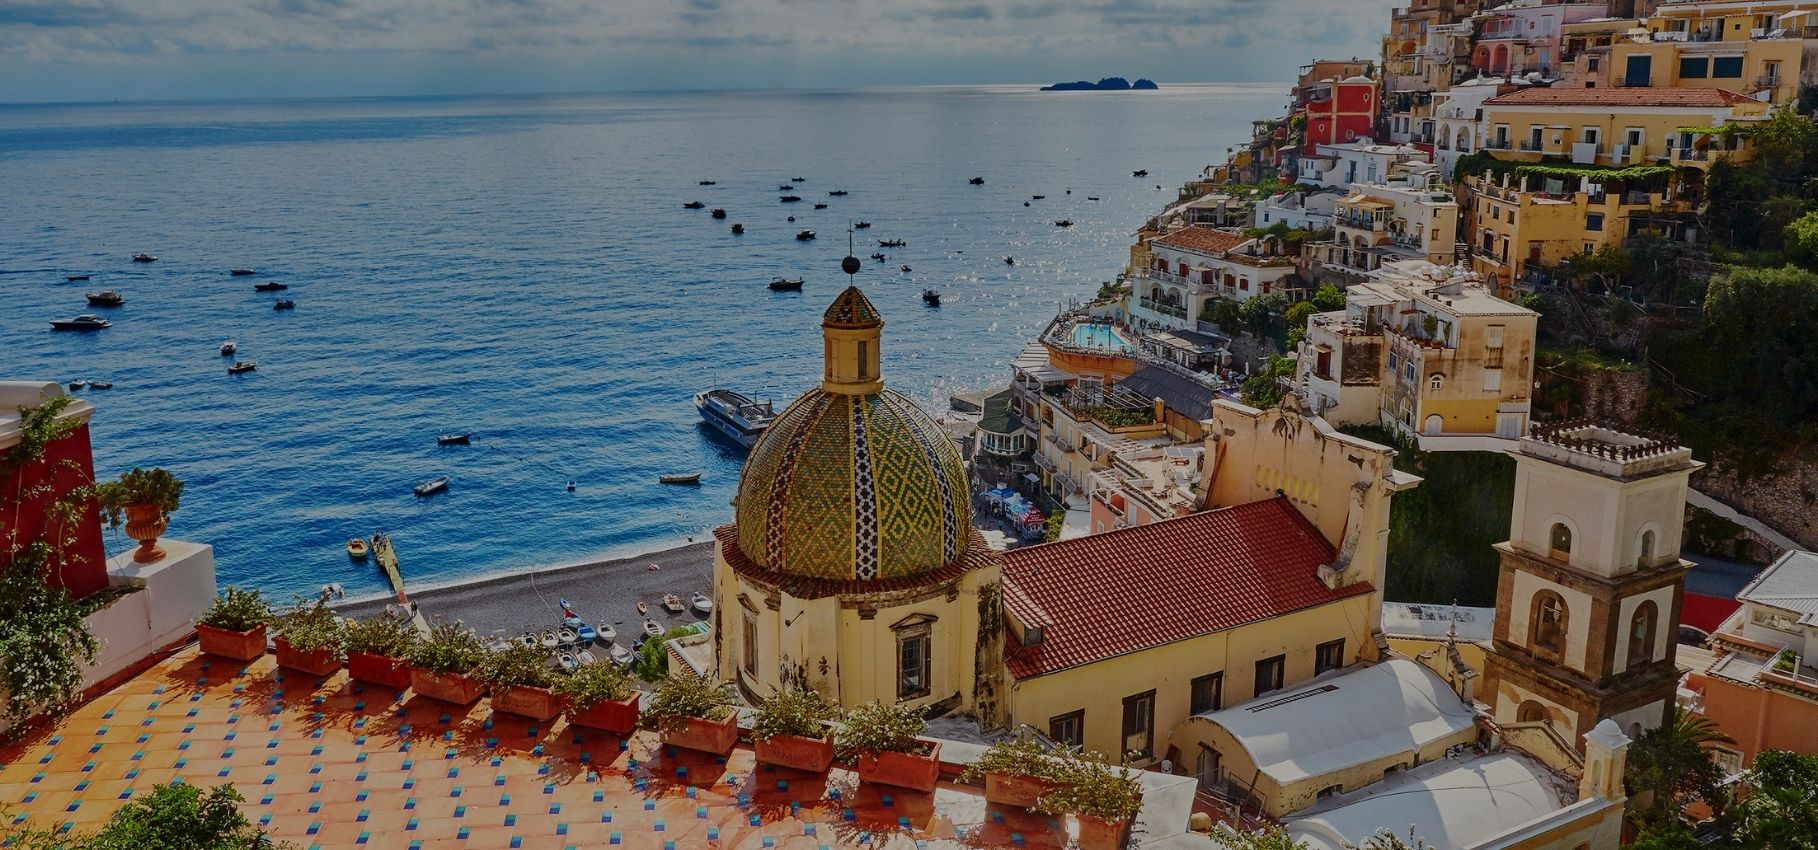 Places to visit in Amalfi Coast, Italy